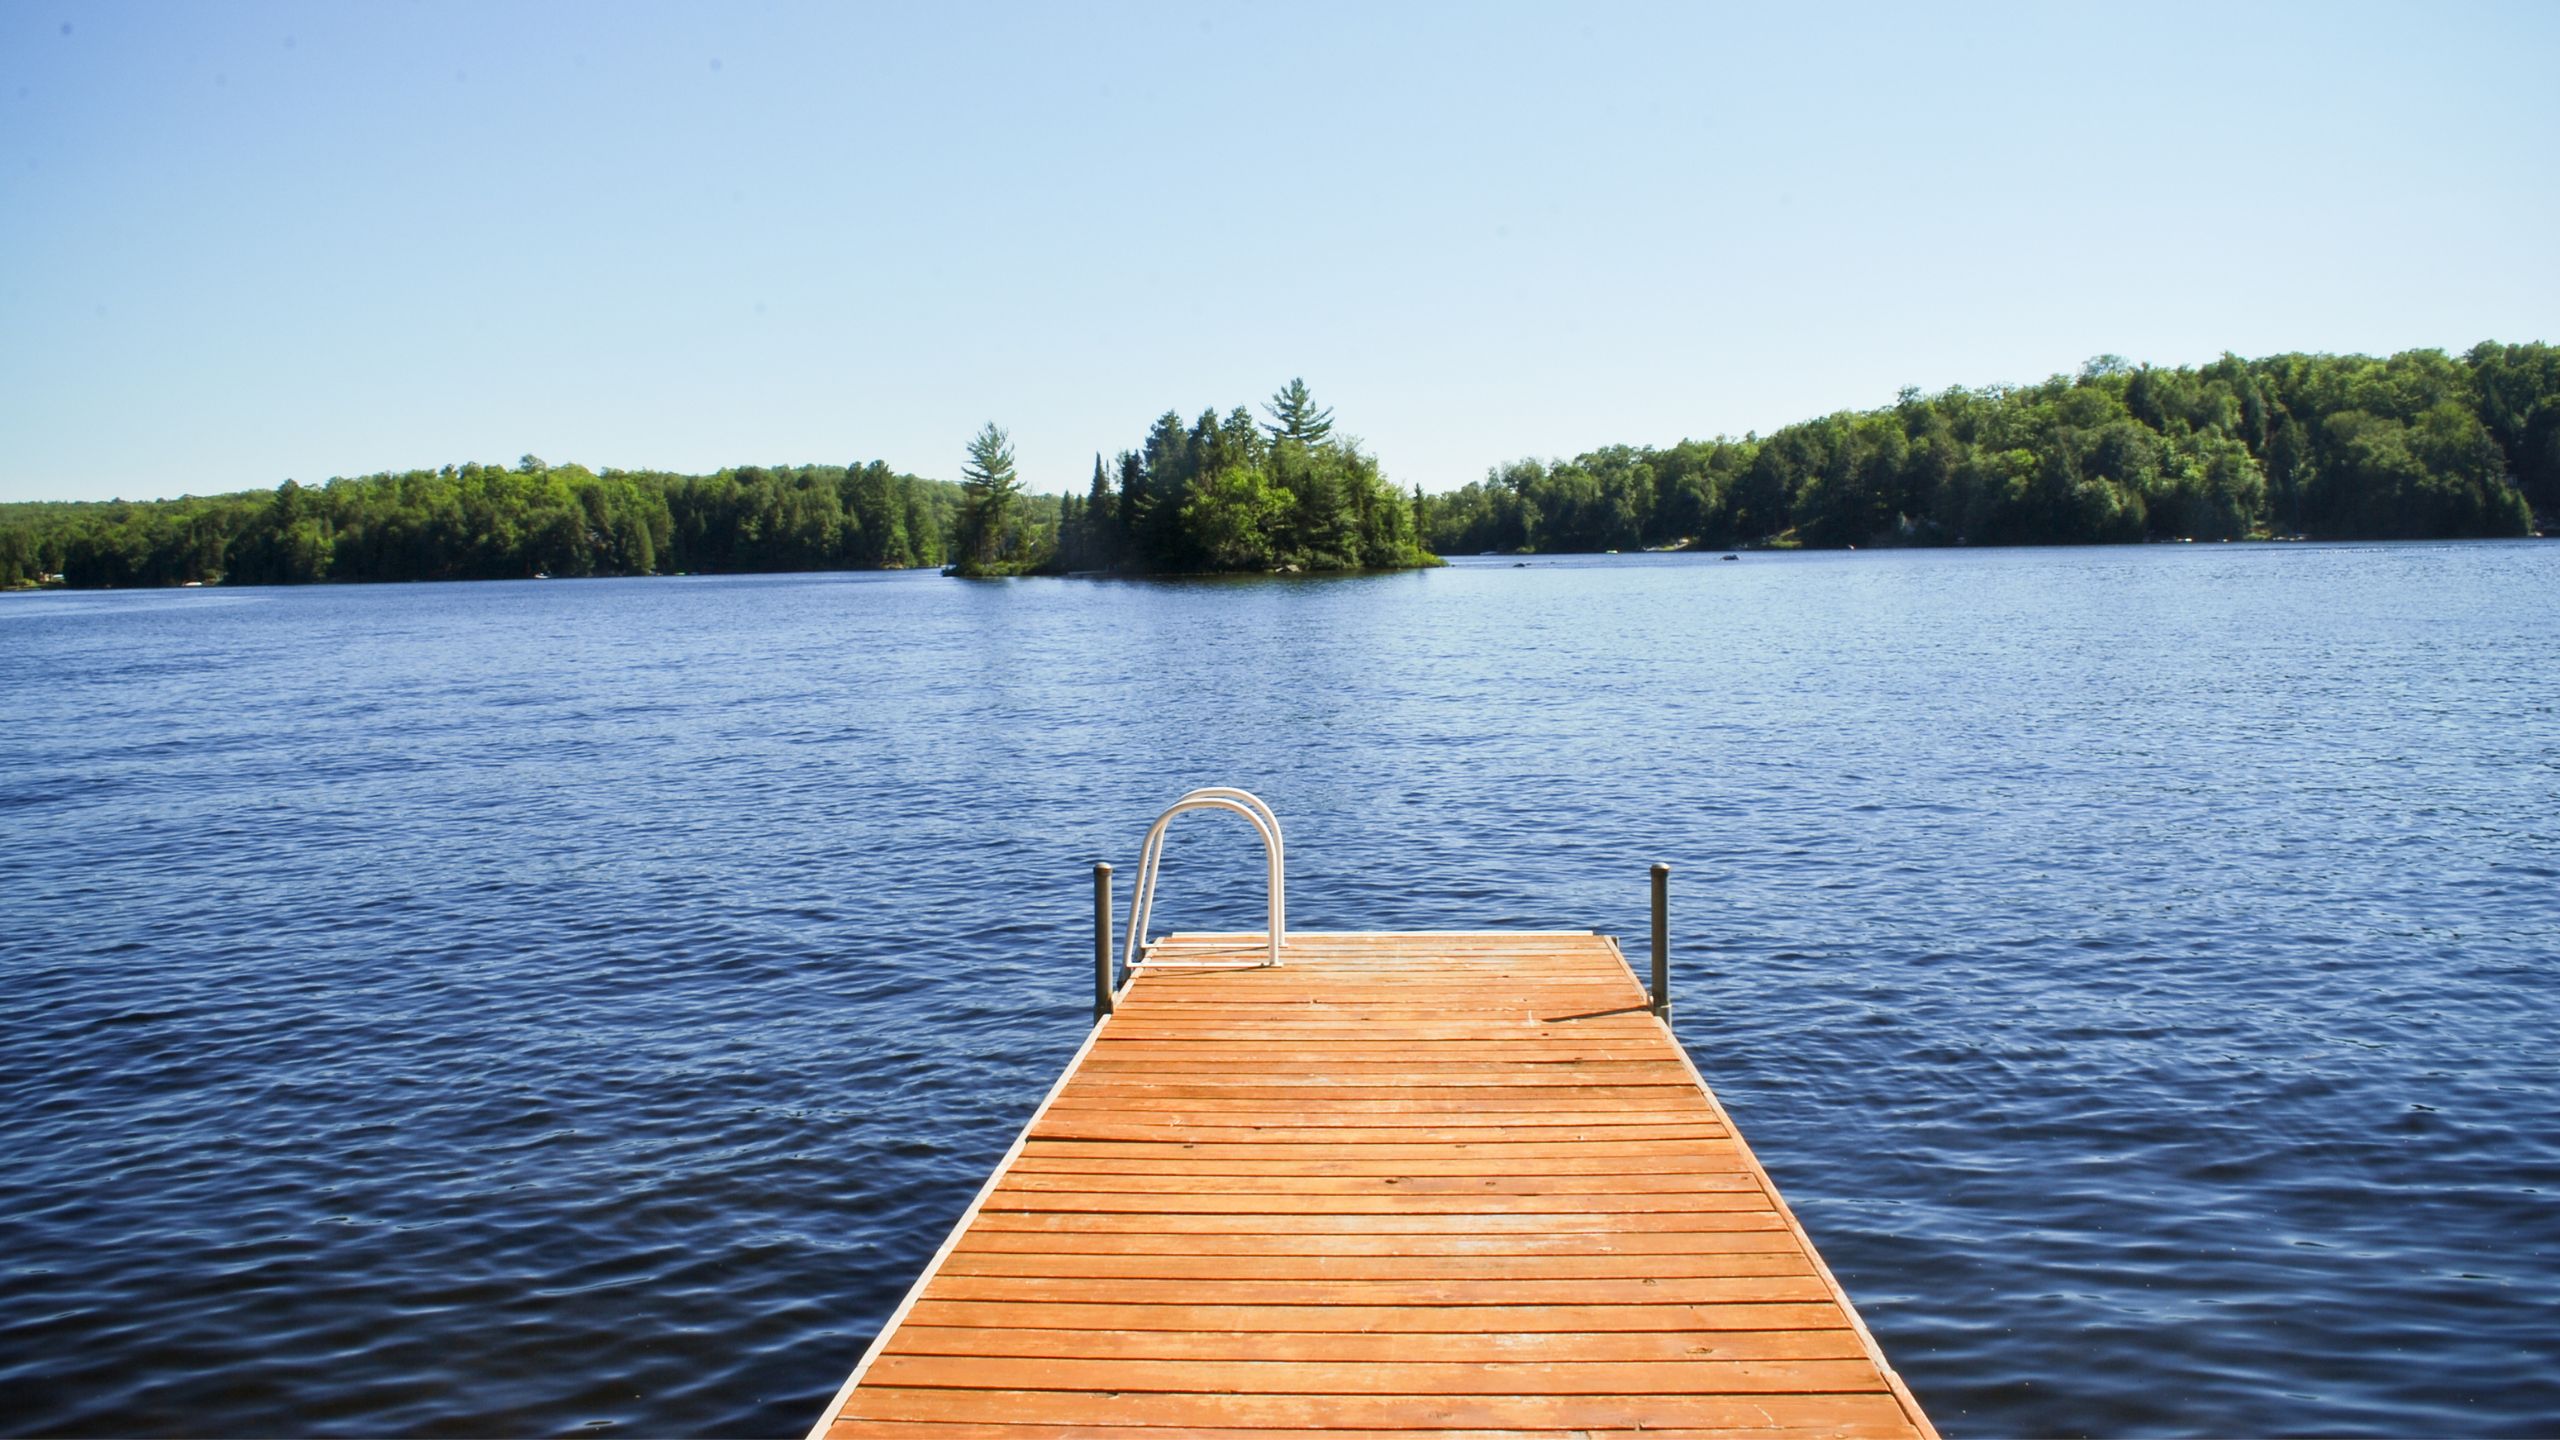 A dock is leading into a lake. The horizon is lined with trees.